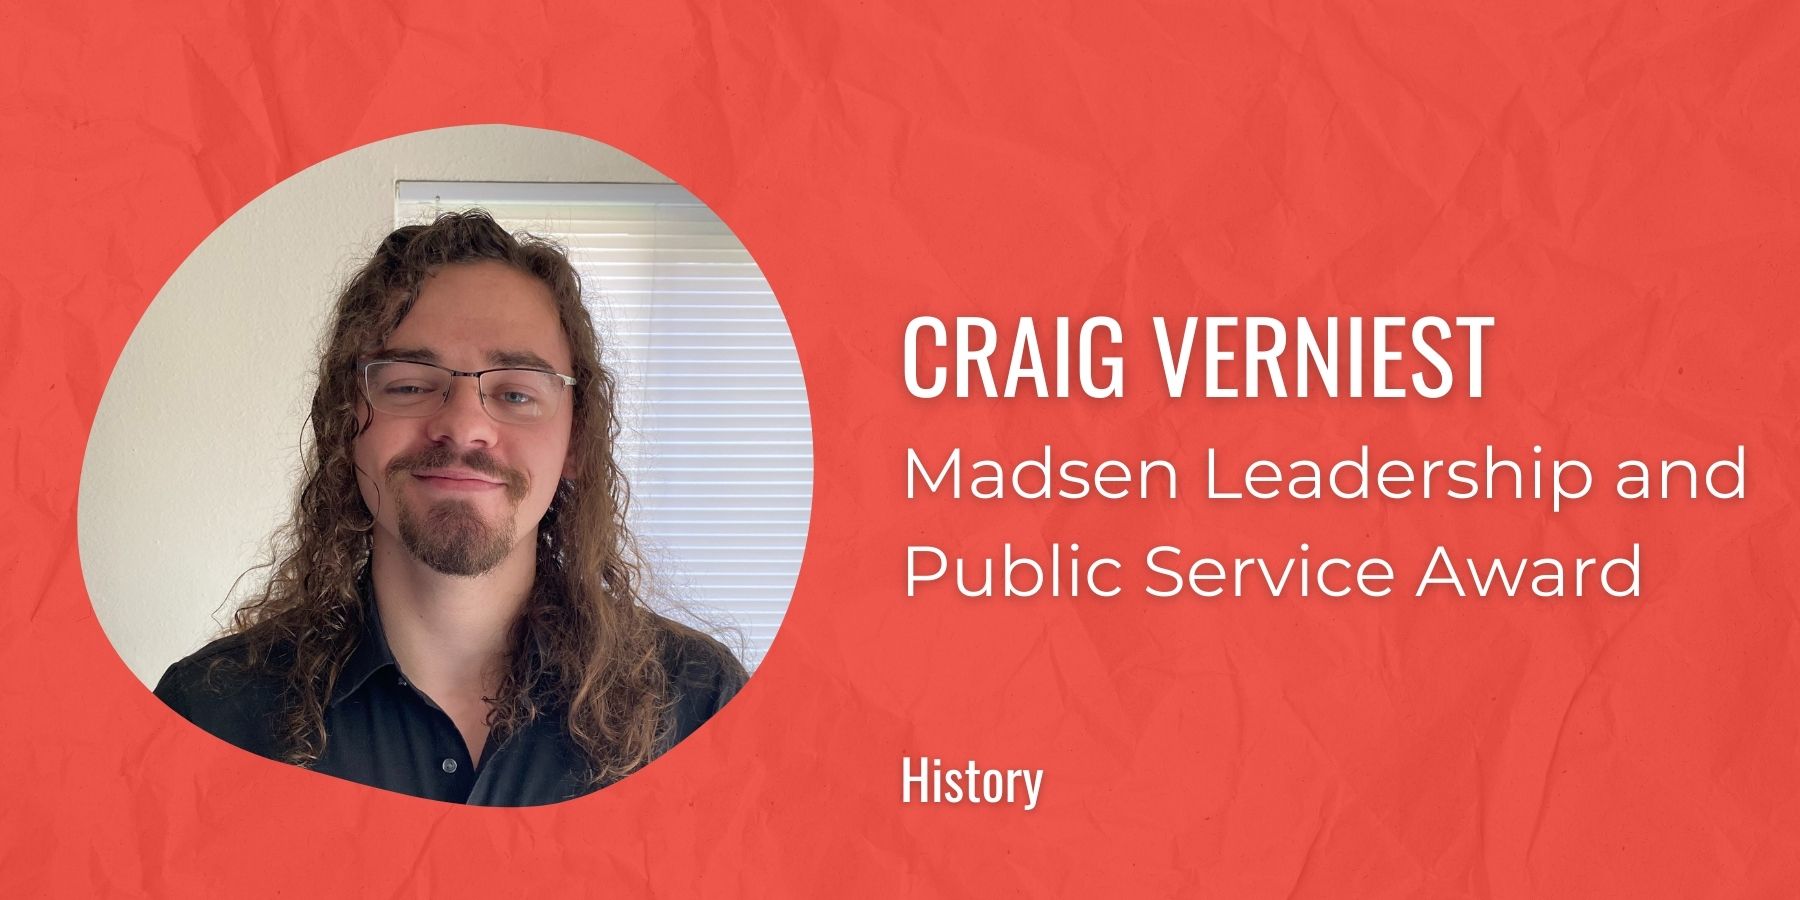 Image of Craig Verniest with text: Madsen Leadership and Public Service Award, History
